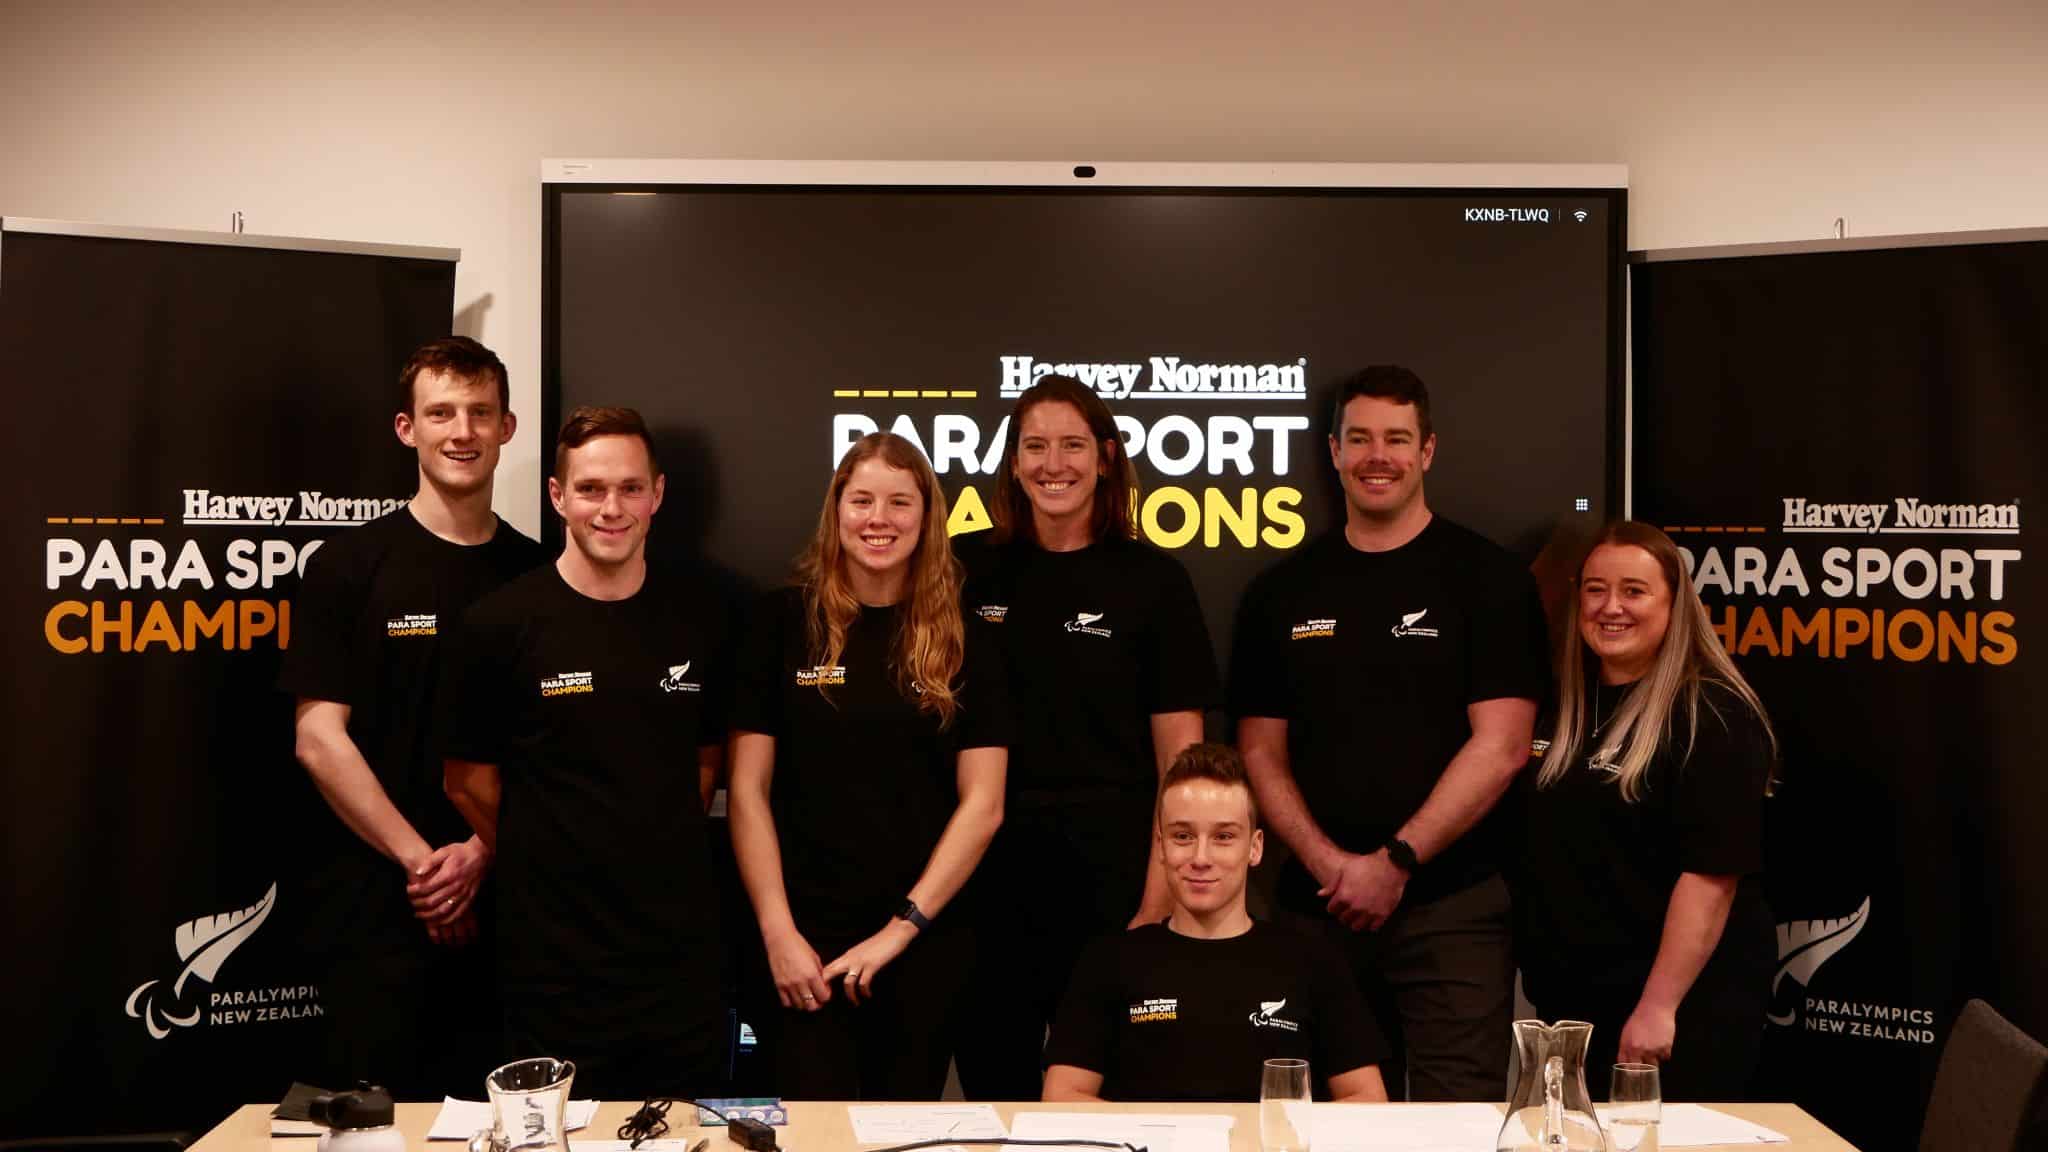 William Stedman, Mitch Joynt, Danielle Aitchison, Anna Taylor, Jaden Movold, Rory McSweeney, Caitlin Dore smiling in front of a banner saying Harvey Norman Para Sport Champions